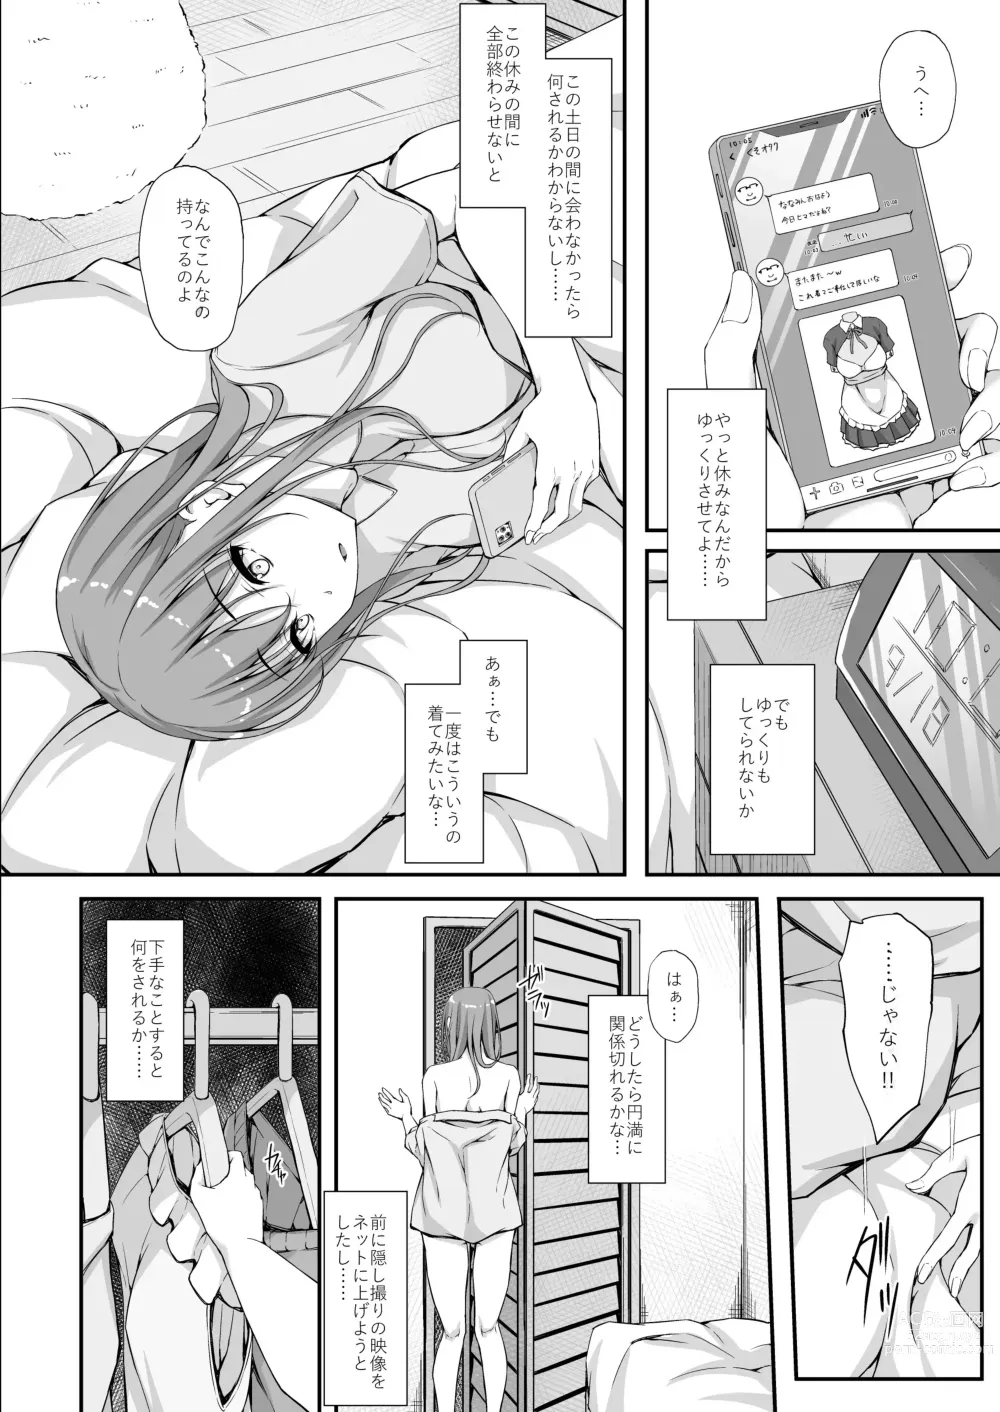 Page 4 of doujinshi Re:Temptation 5